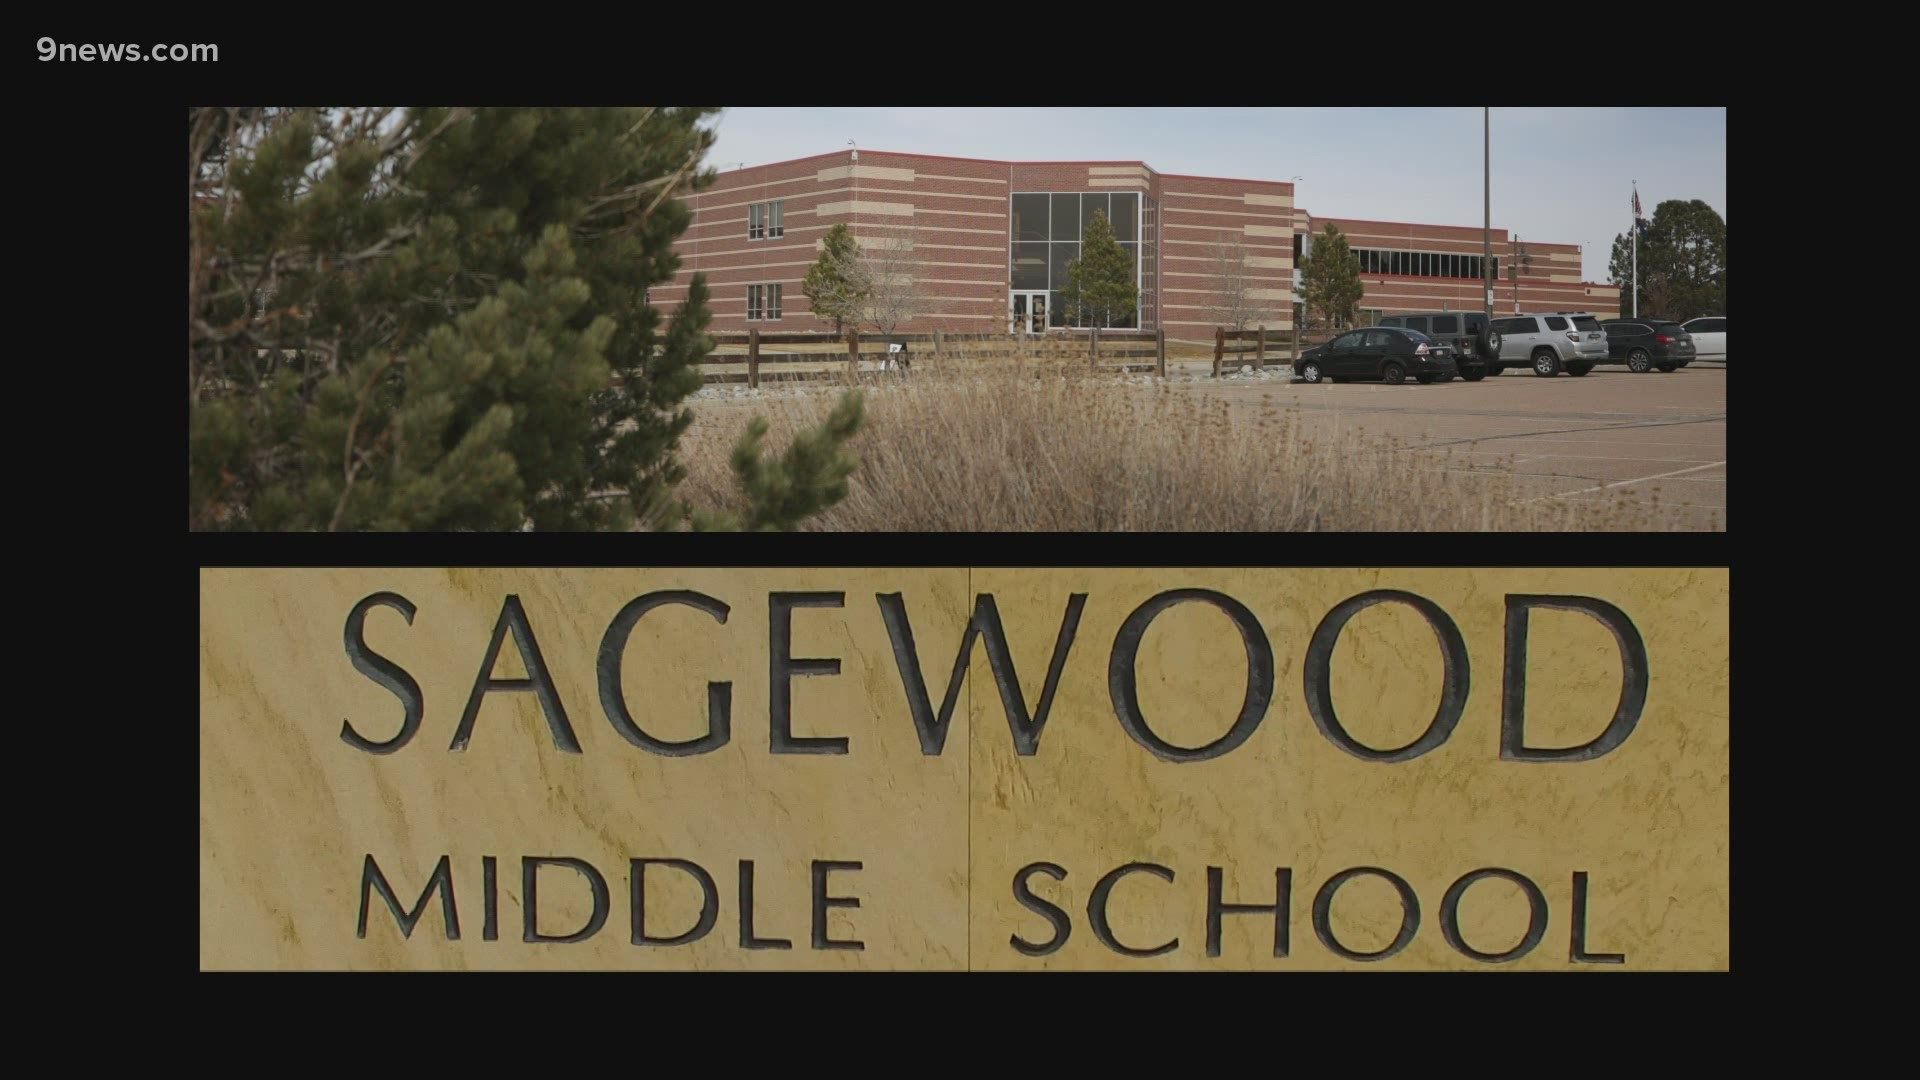 The boy poked a classmate with a pencil after the classmate wrote on him with a marker in a Douglas County middle school, according to the ACLU.